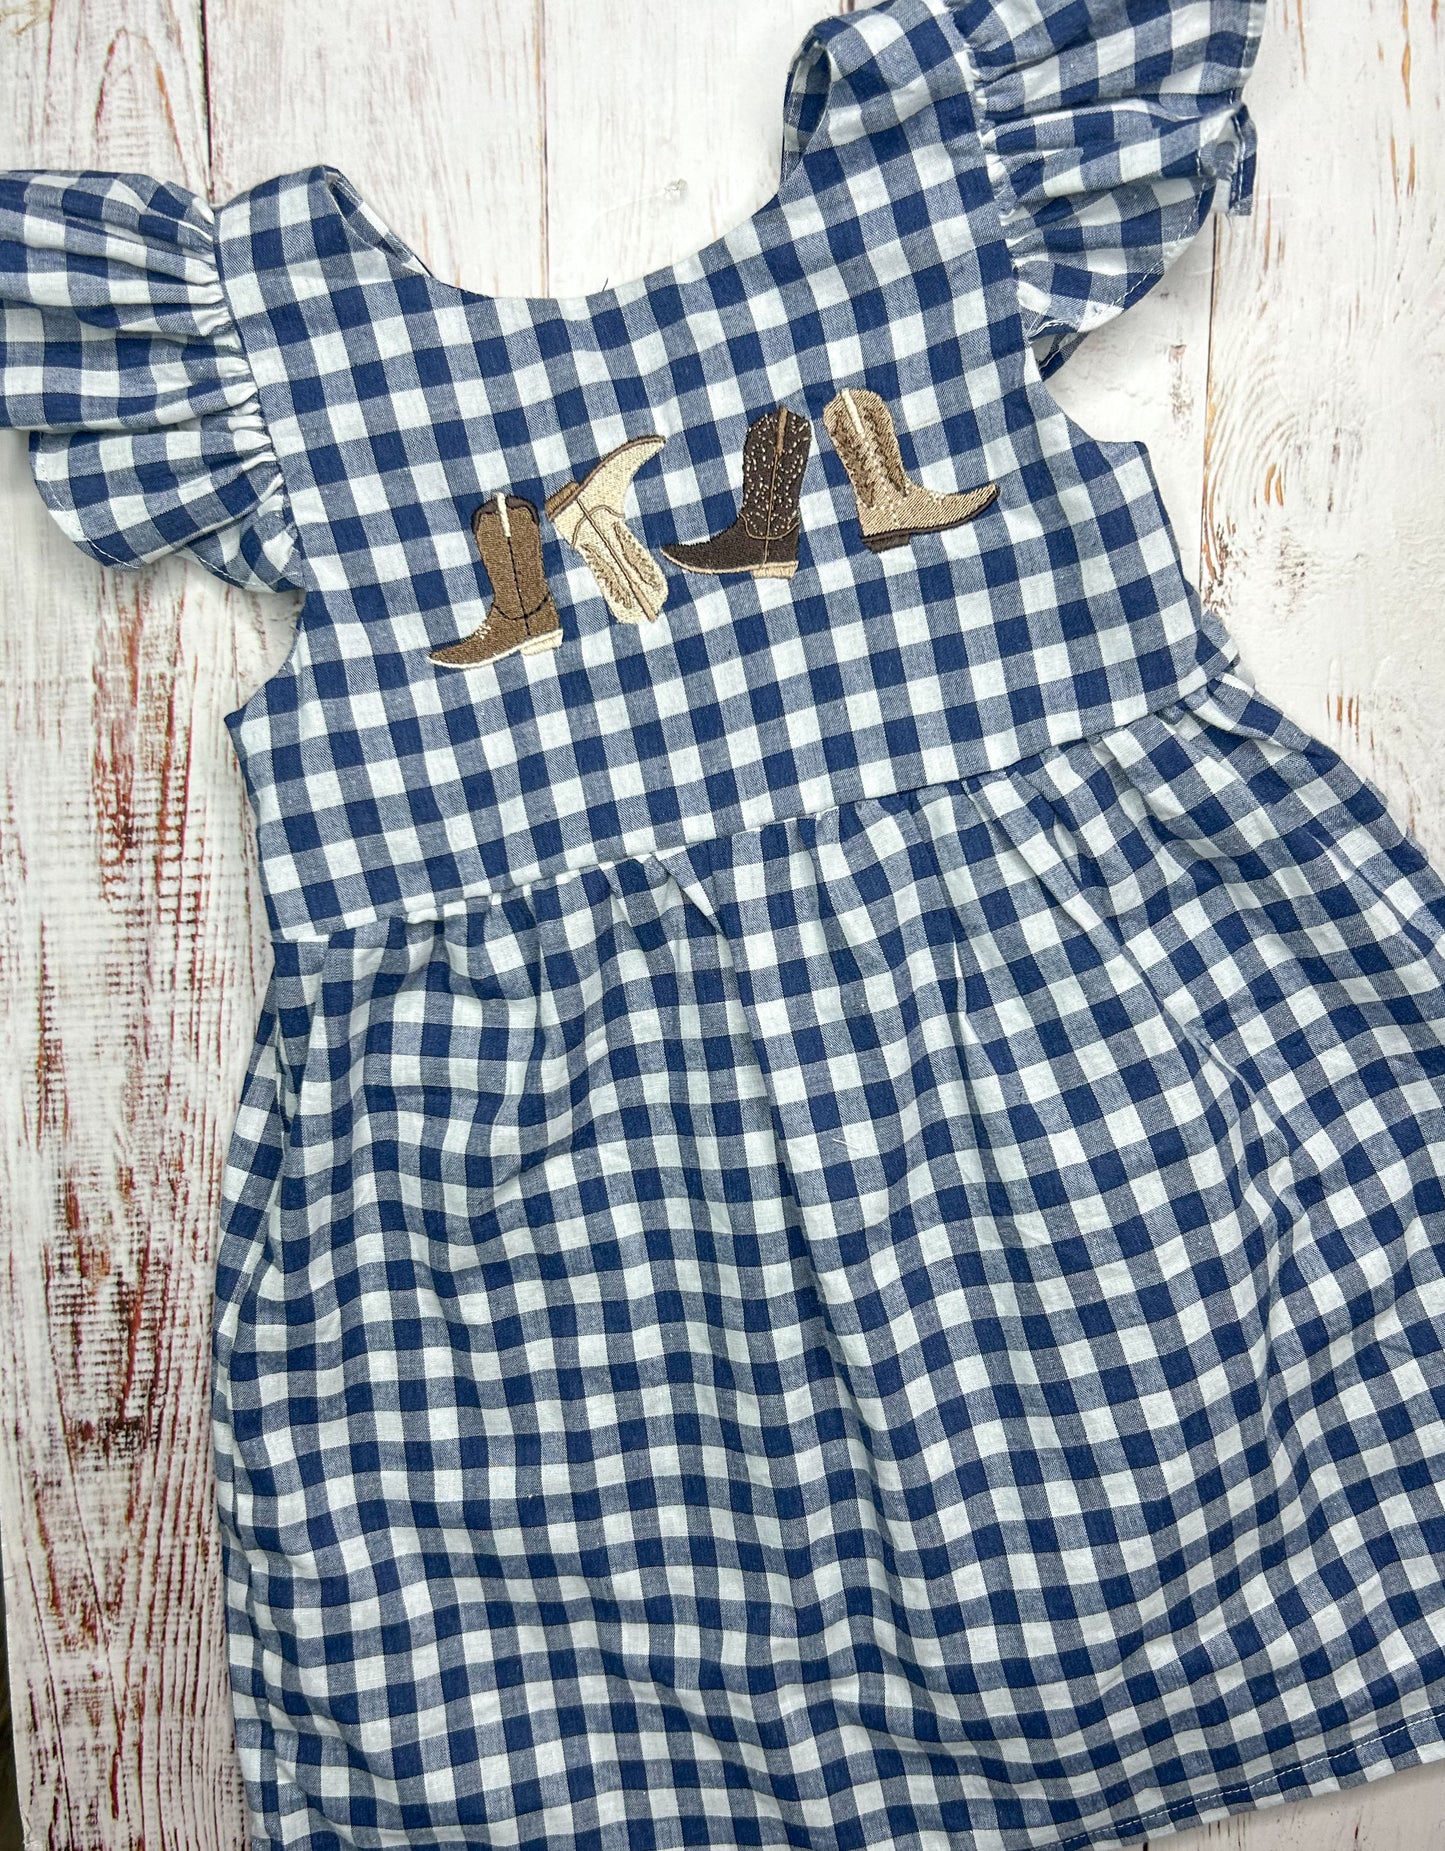 Cowgirl Boots Gingham Dress